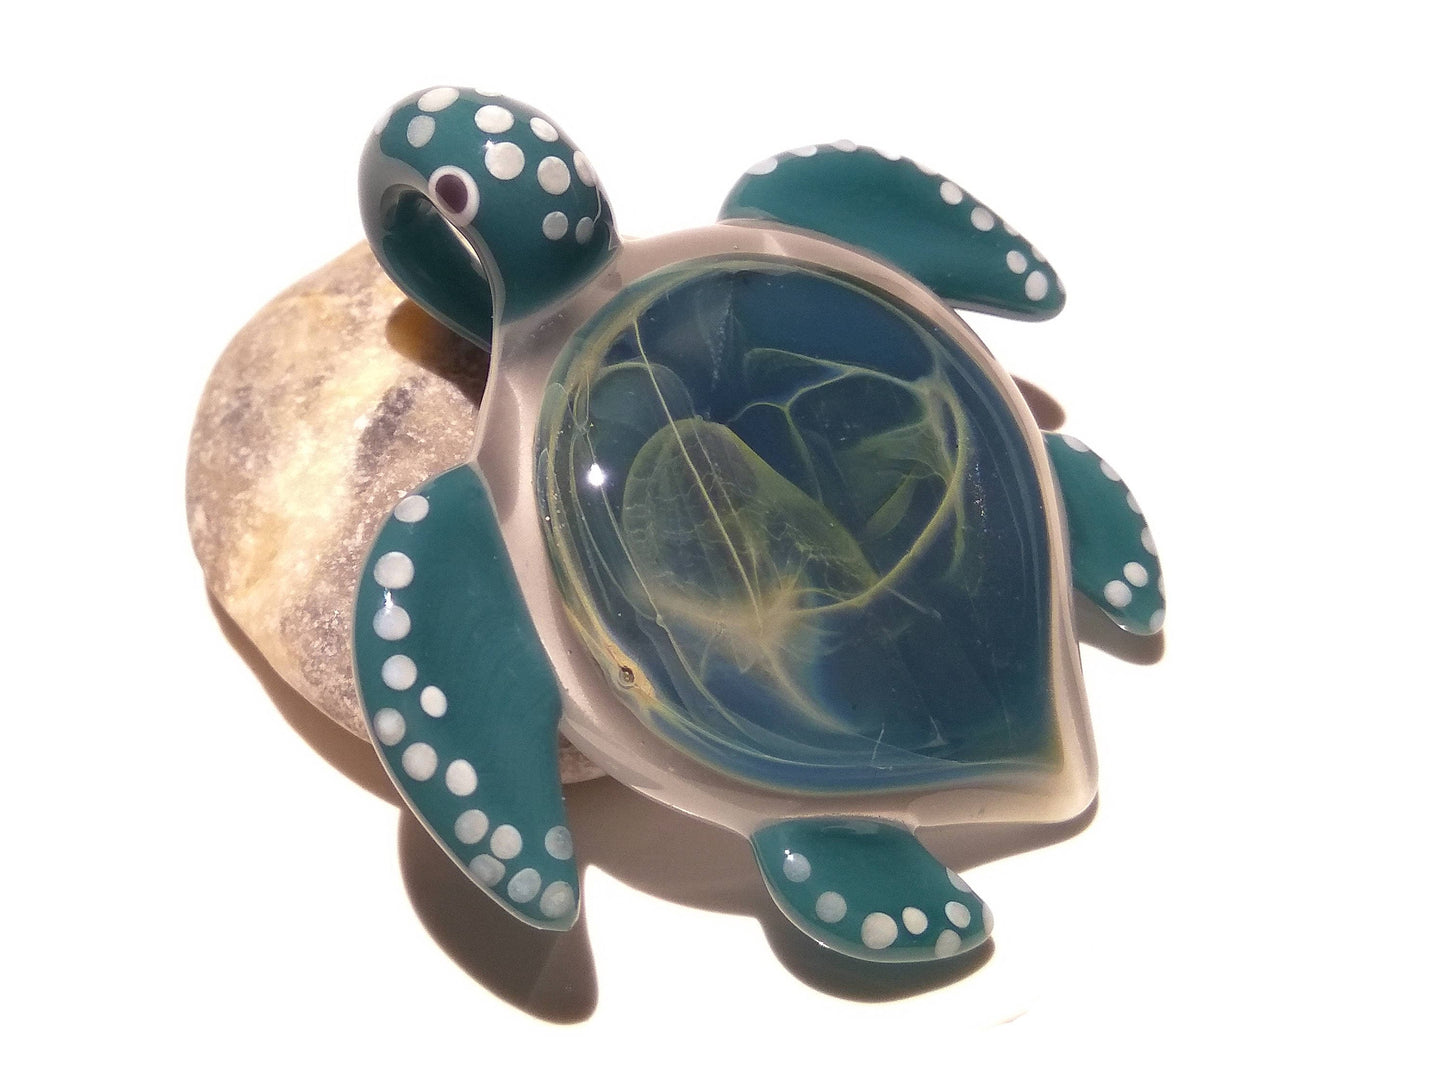 Star Galaxy Turtle Pendant - Glass Pendant - Glass Jewelry - Glass Art - Turtle - Blown Glass - Artist Signed - Details of Pure Silver